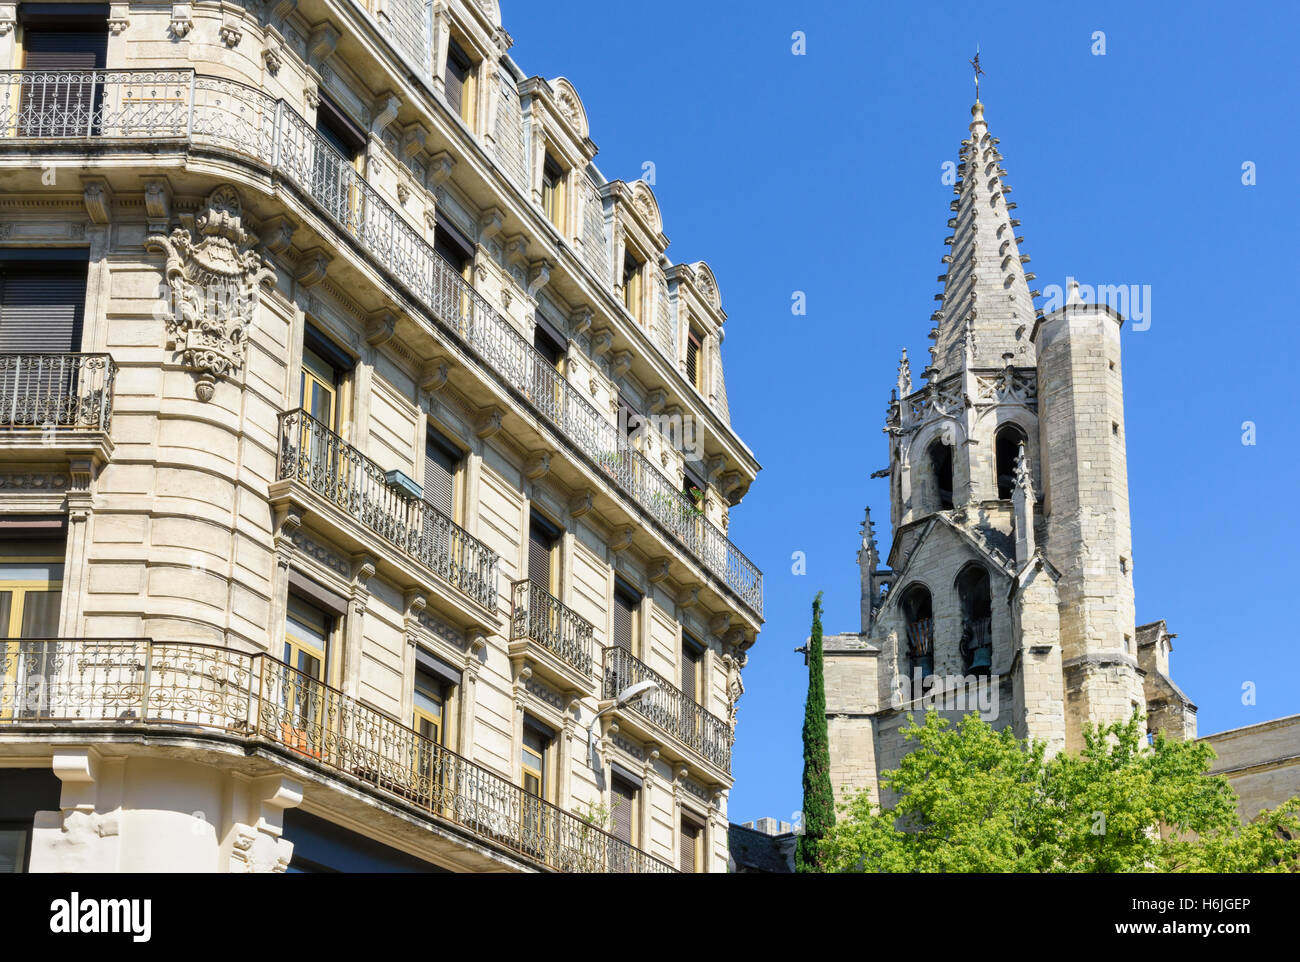 Basilique Saint-Pierre, and balconied building in Place Carnot, Avignon, France Stock Photo